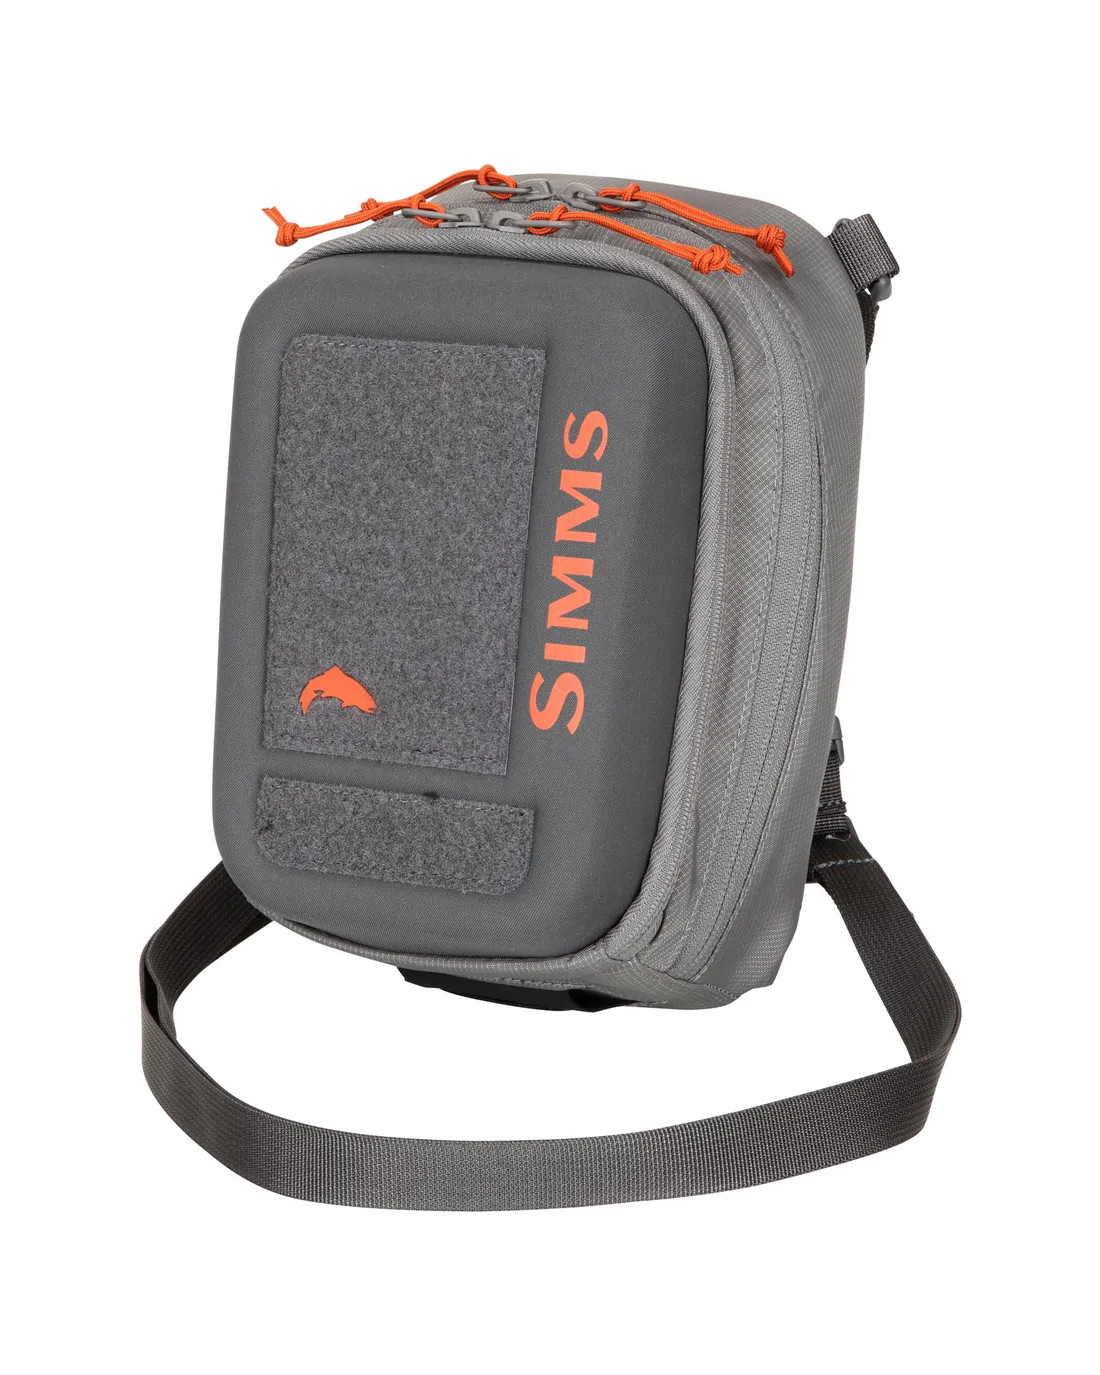 SIMMS Freestone HIP PACK fishing bag Pewter 2023 new color